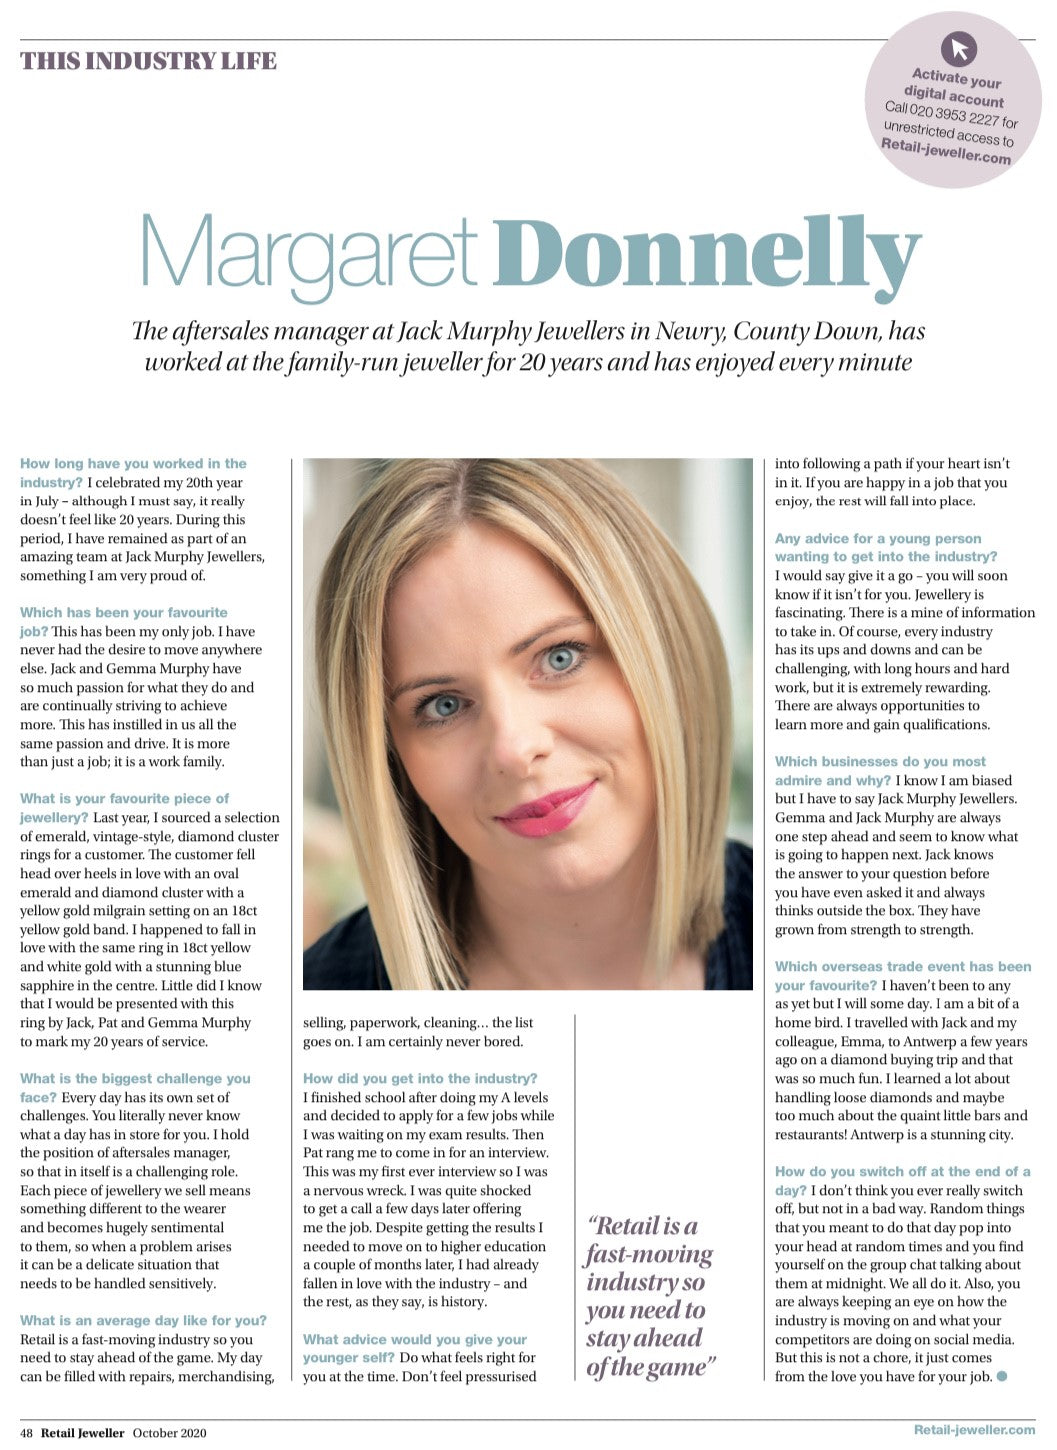 Celebrating 20 Years: Aftersales Manager, Margaret Donnelly Chats to Retail Jeweller Magazine